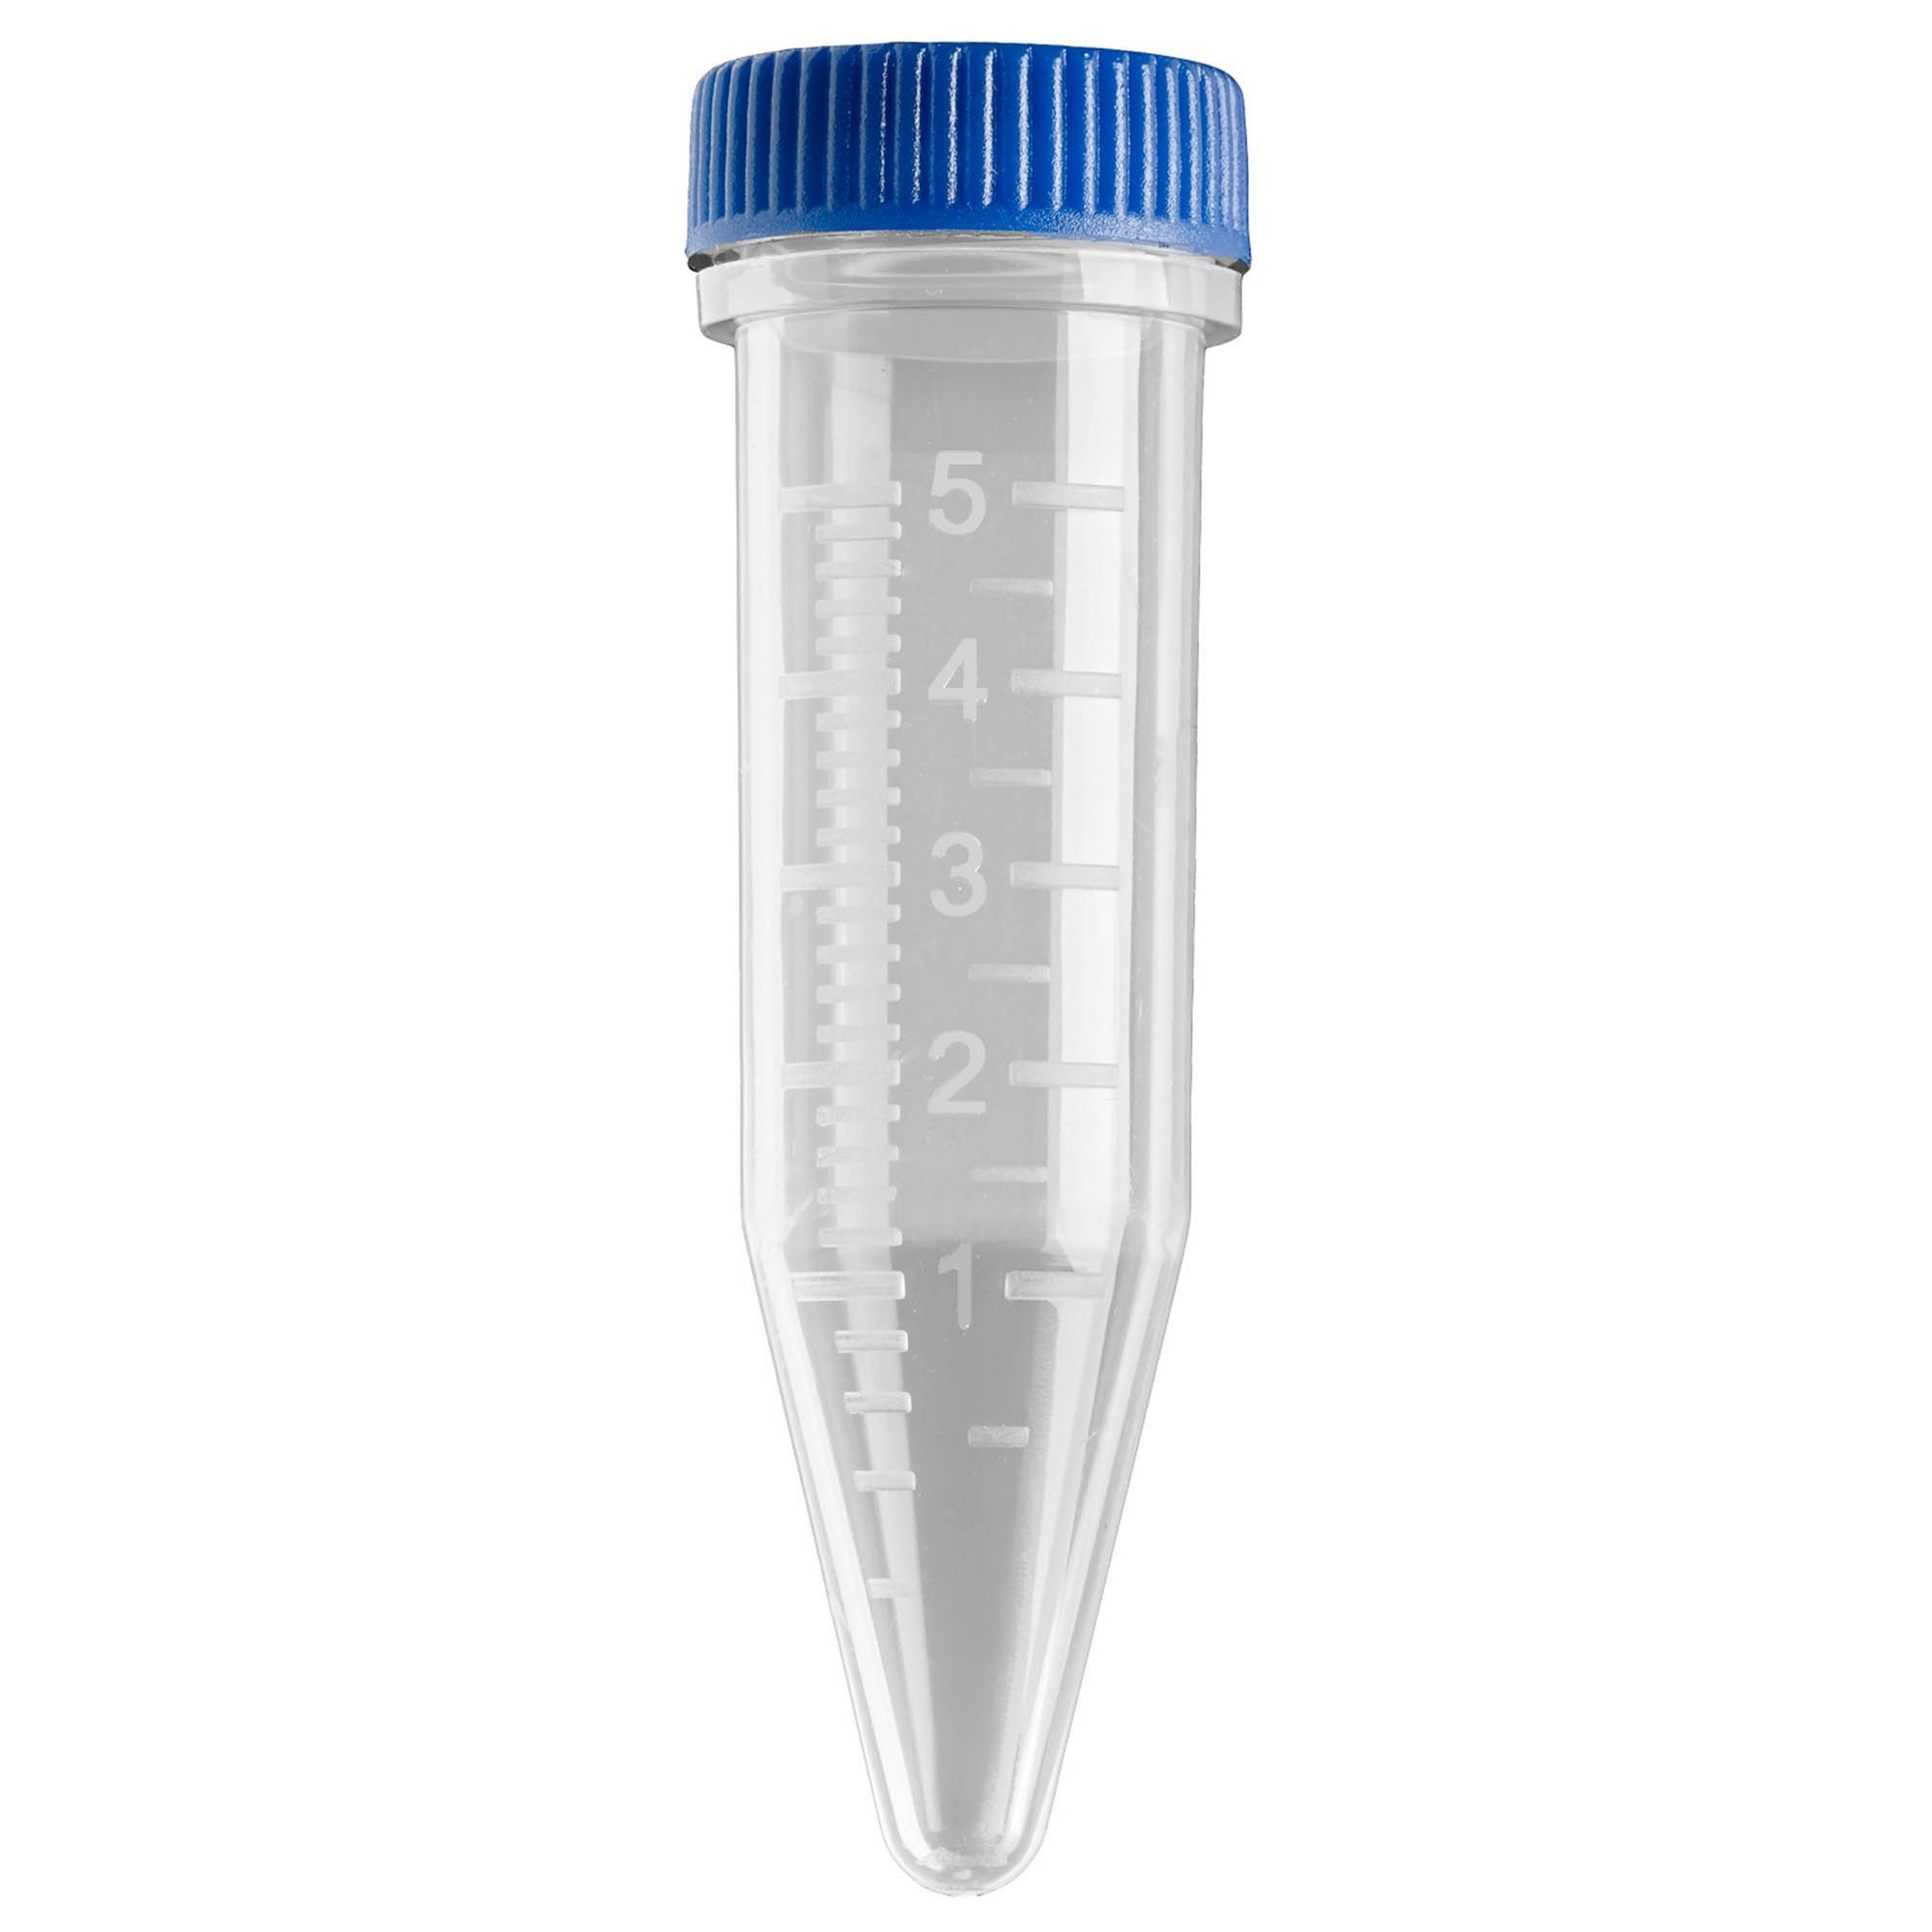 Five-O 5mL MacroTube Sterile Centrifuge Tubes with Screw Caps - Natural (5 Bags of 100/Bag)